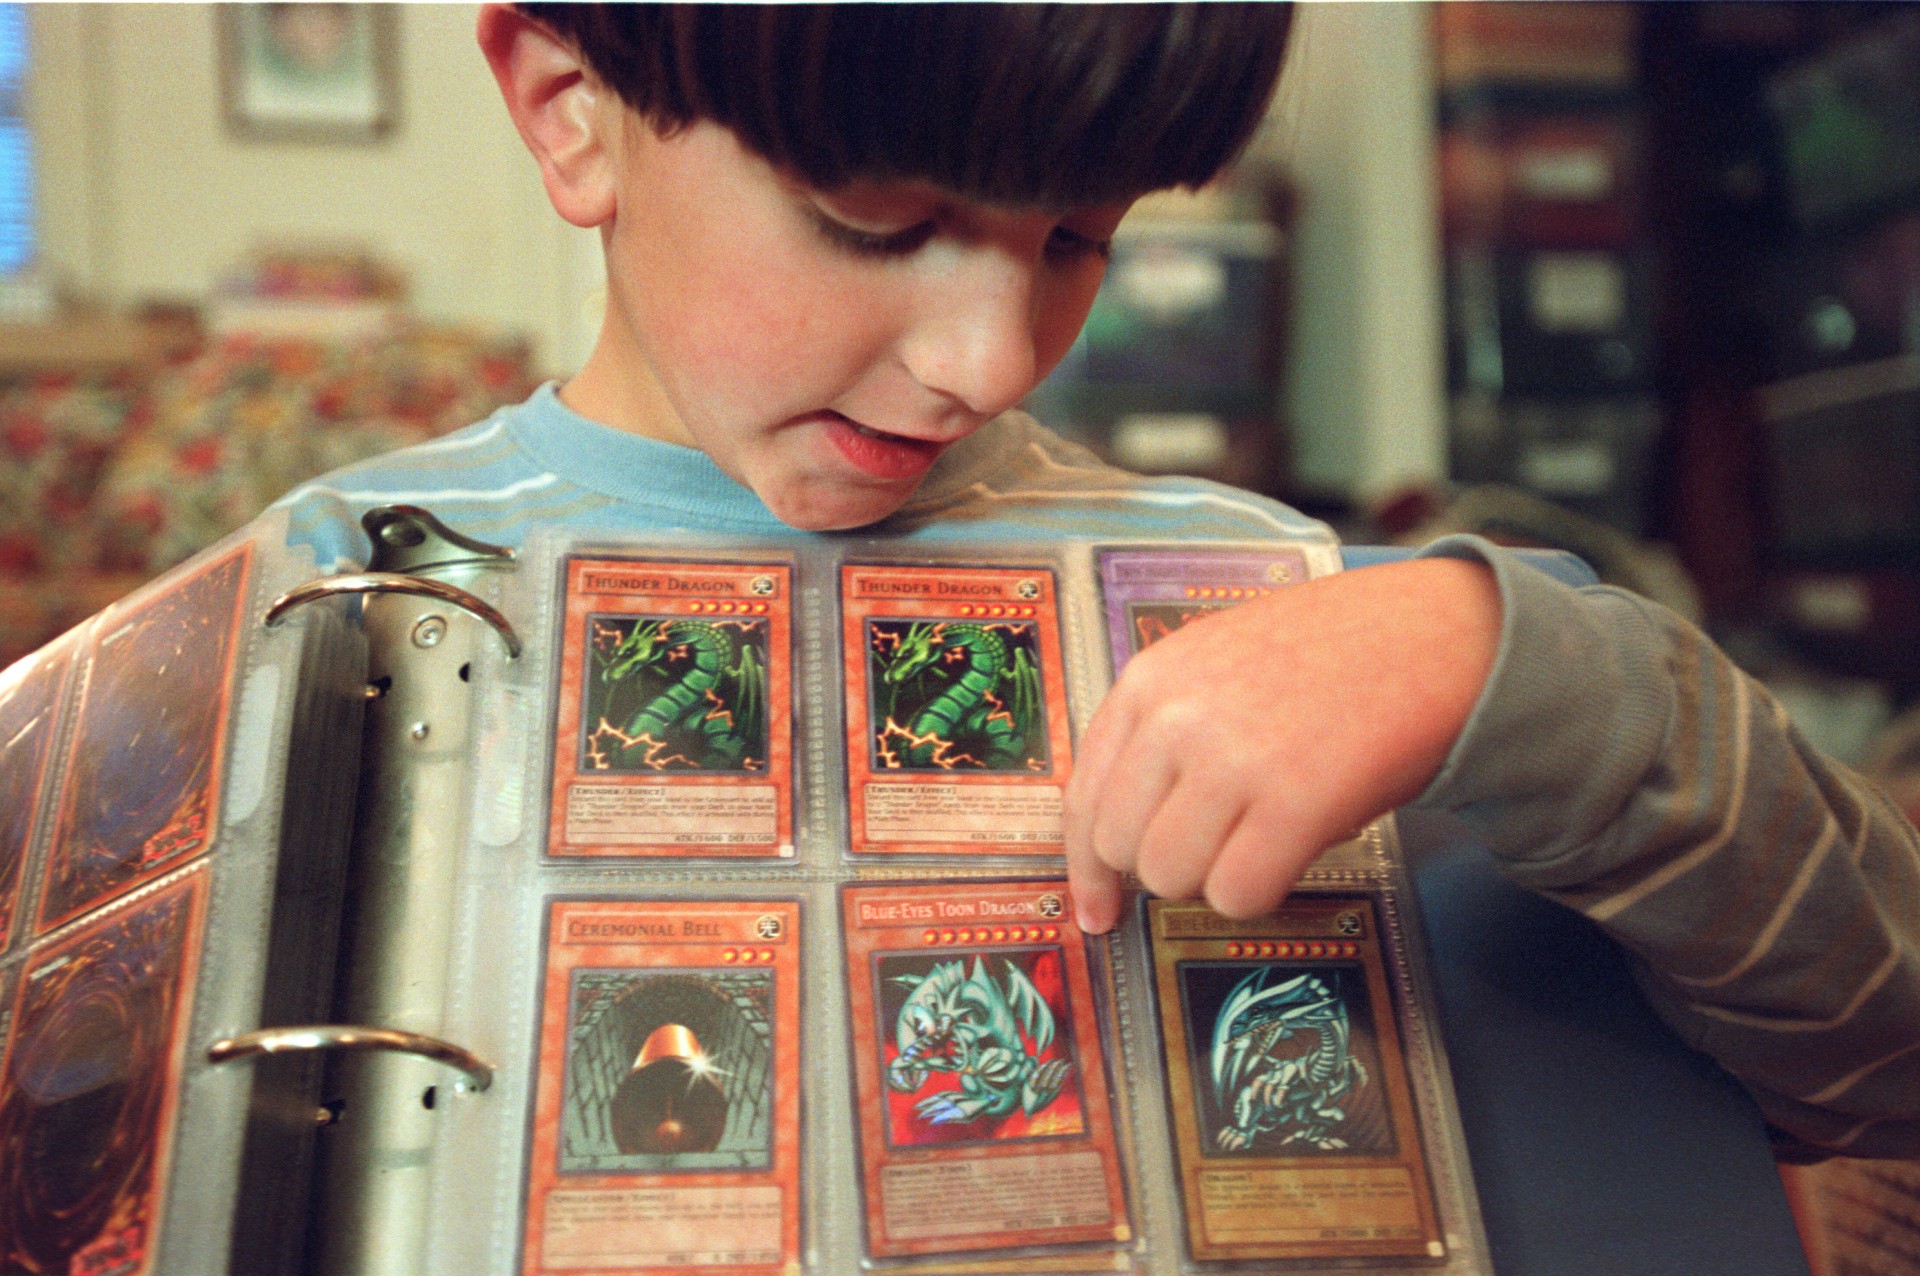 He's a hero” Yu-Gi-Oh author reportedly died trying to save people